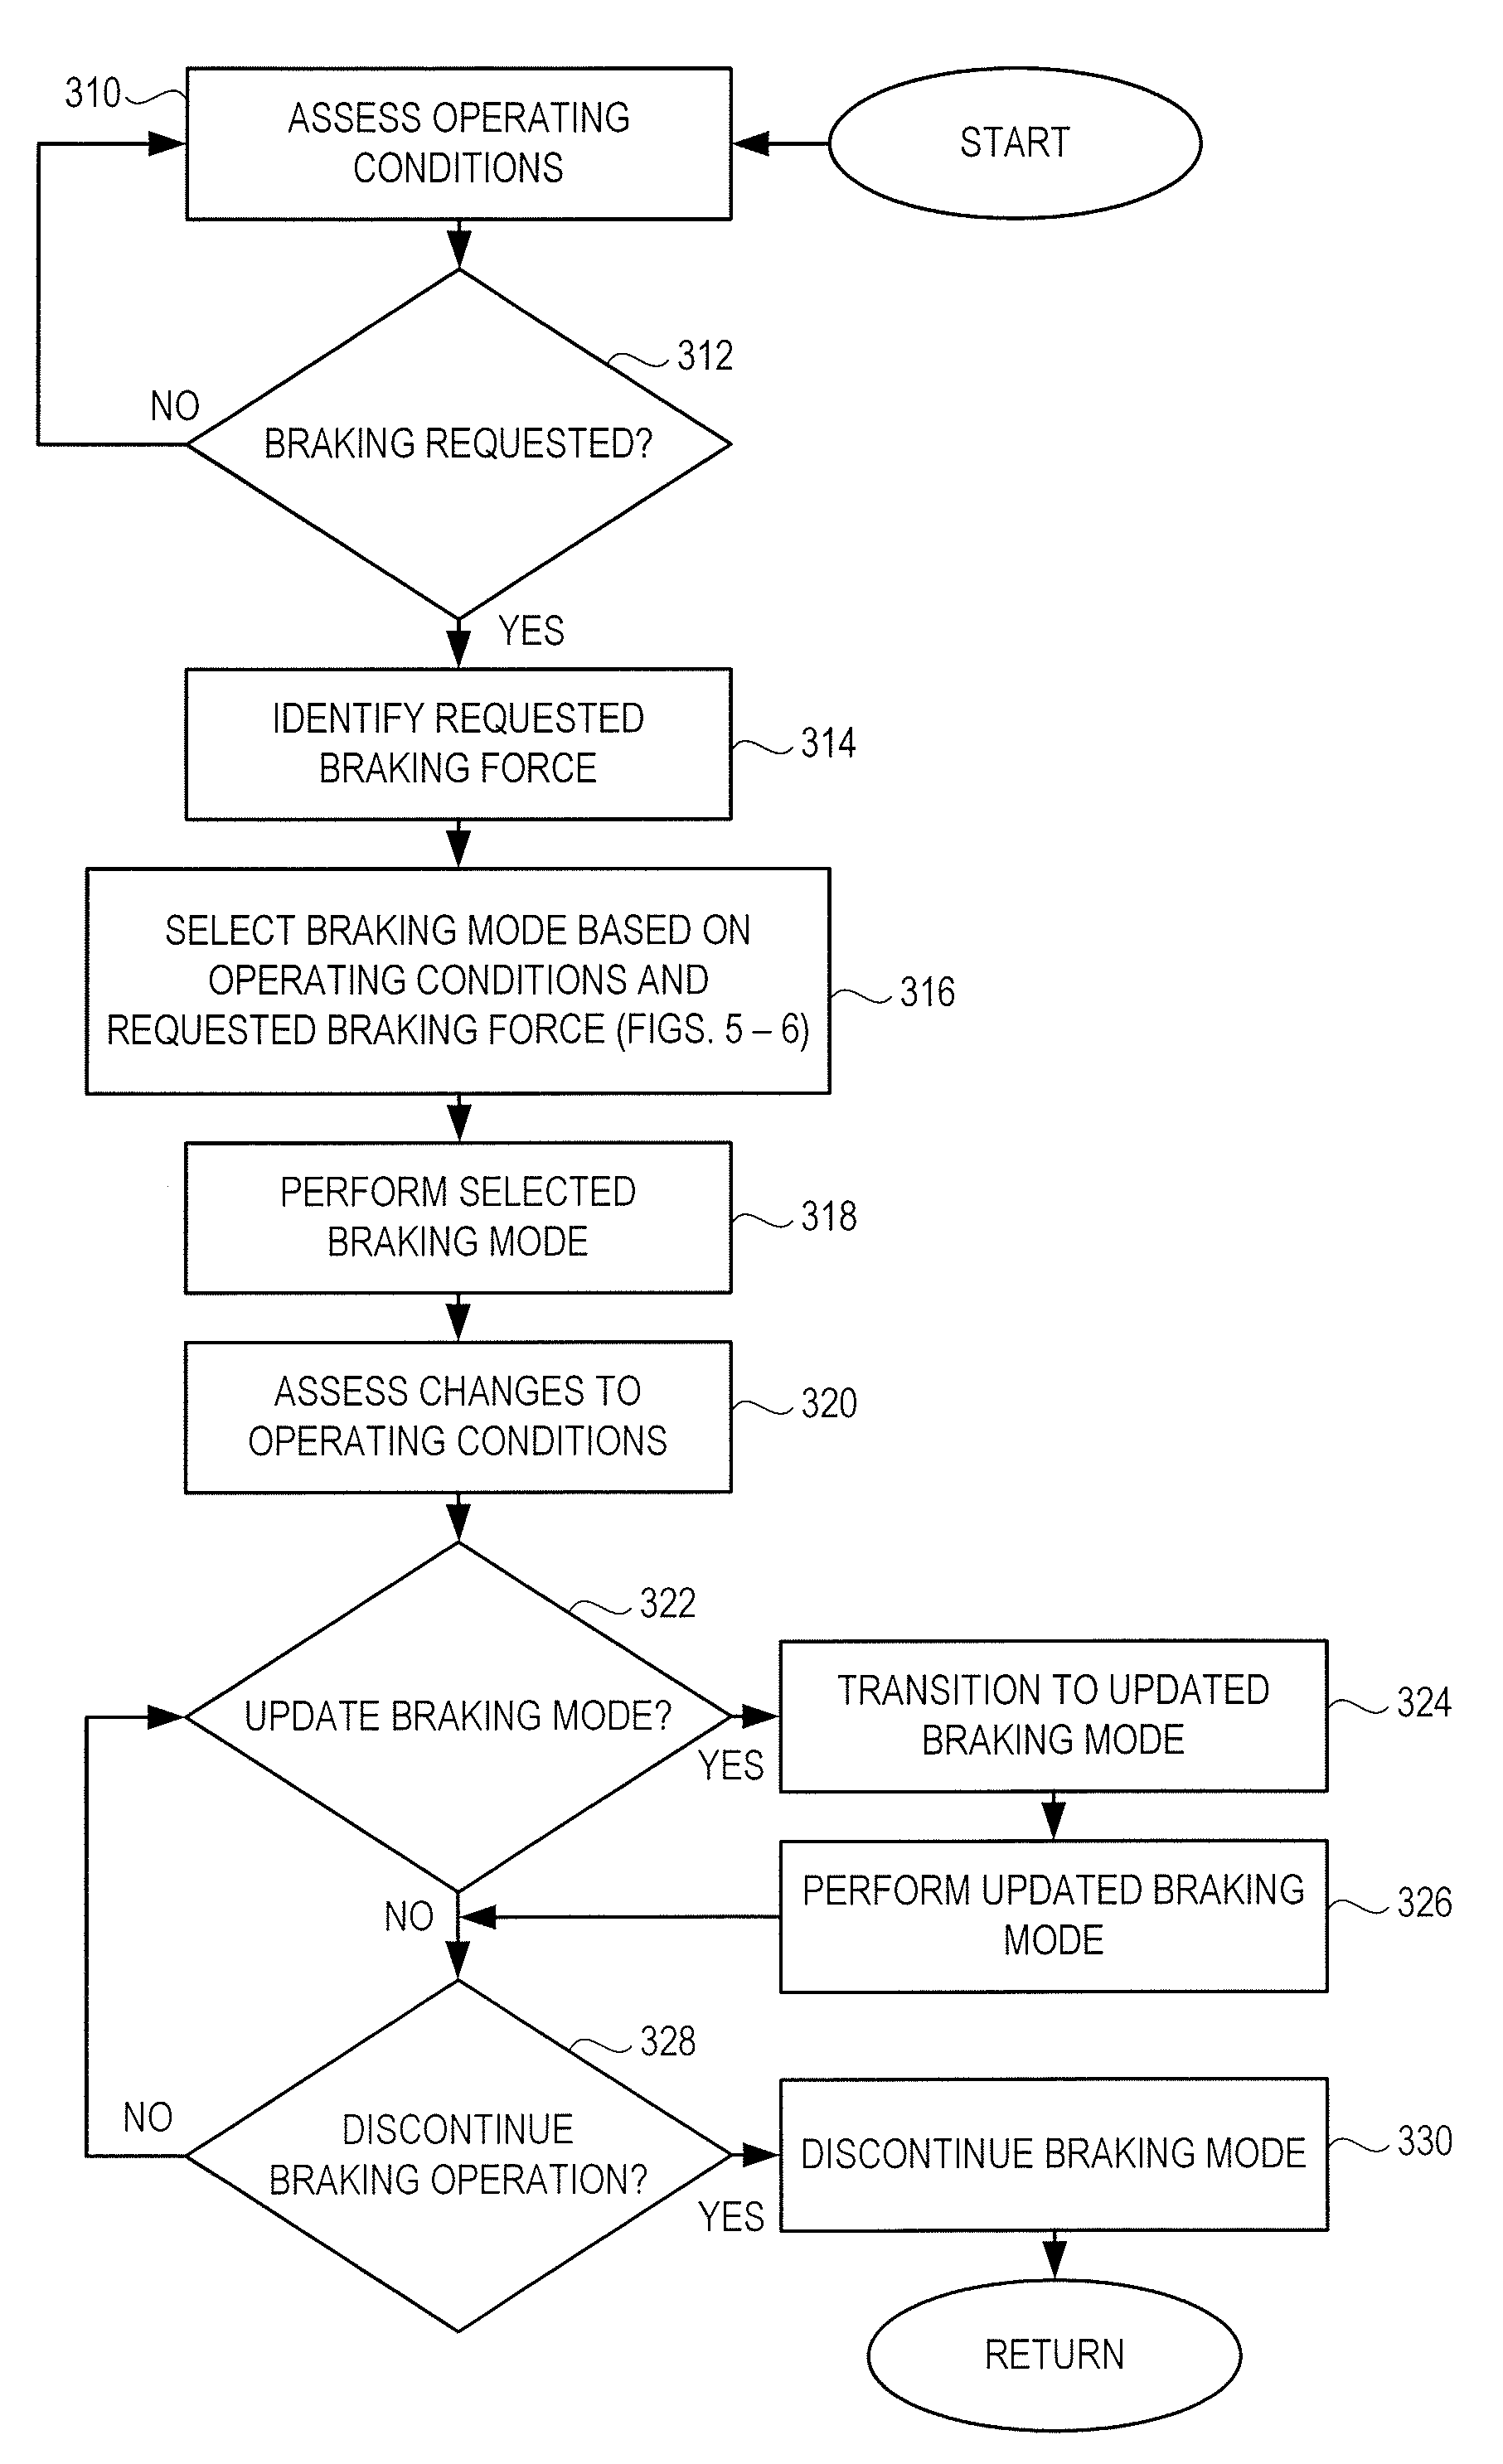 Negative driveline torque control incorporating transmission state selection for a hybrid vehicle